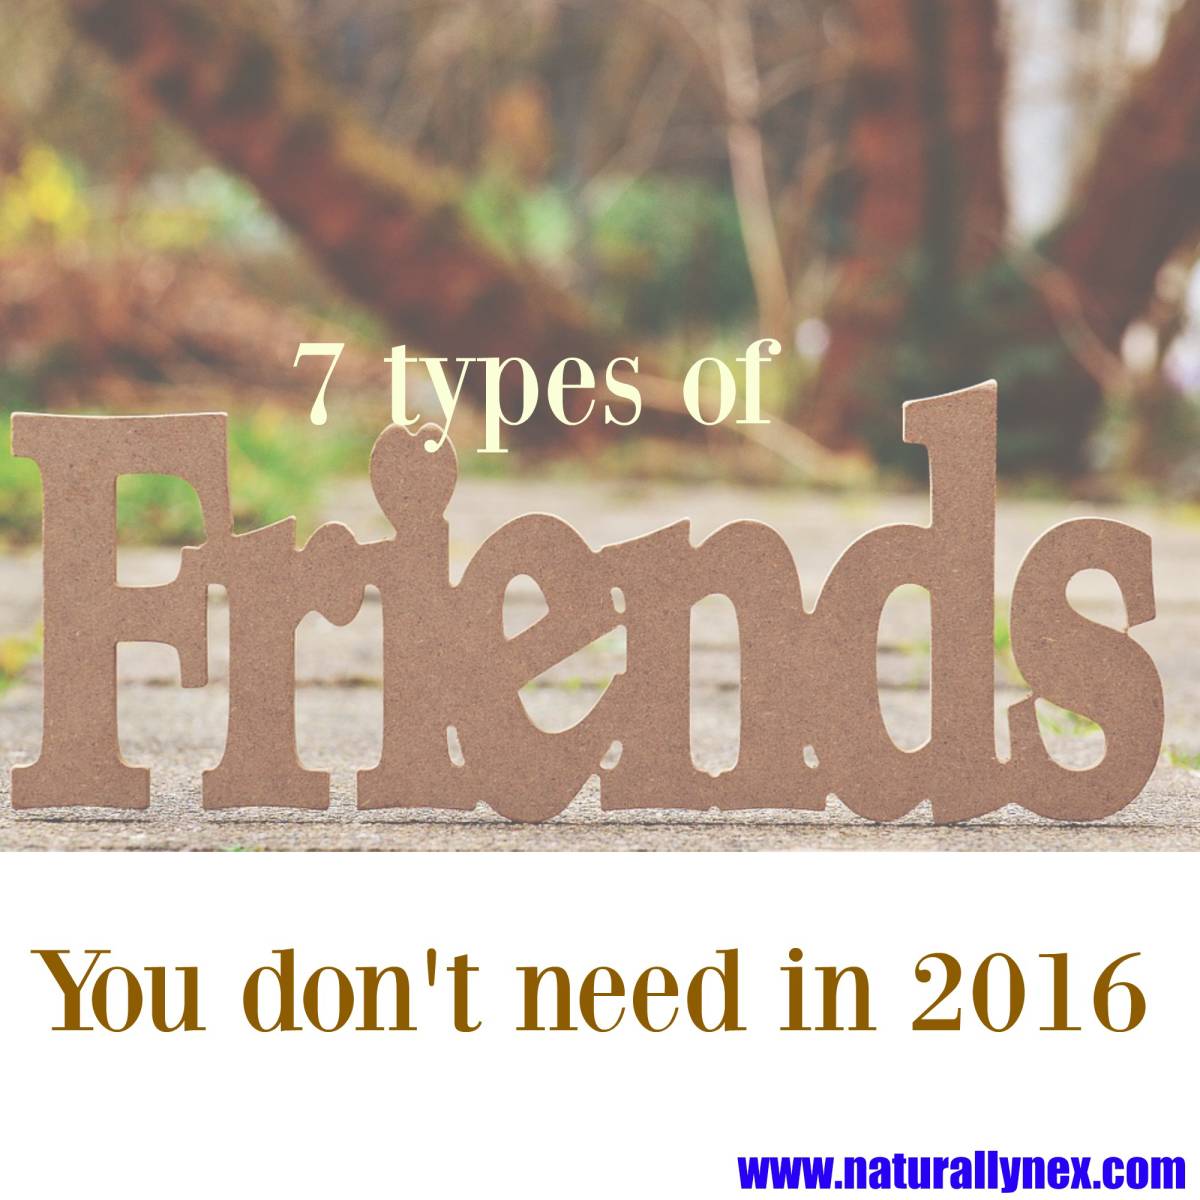 7 types of friends you don’t need in 2016